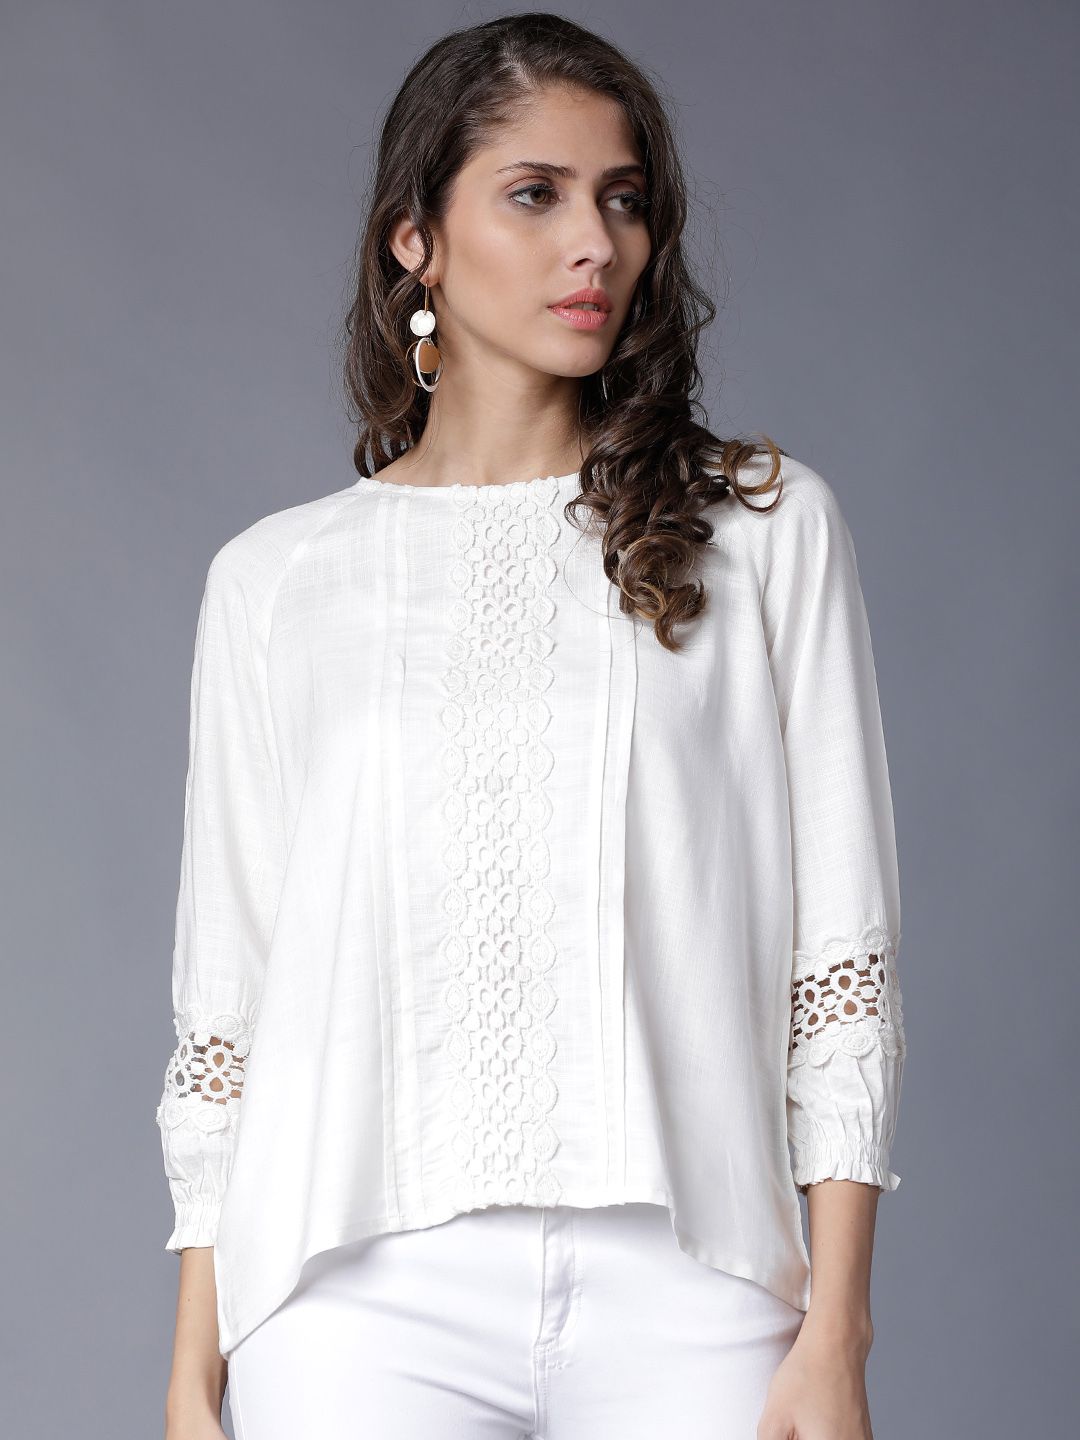 Tokyo Talkies Off-White Self Design A-Line Top Price in India